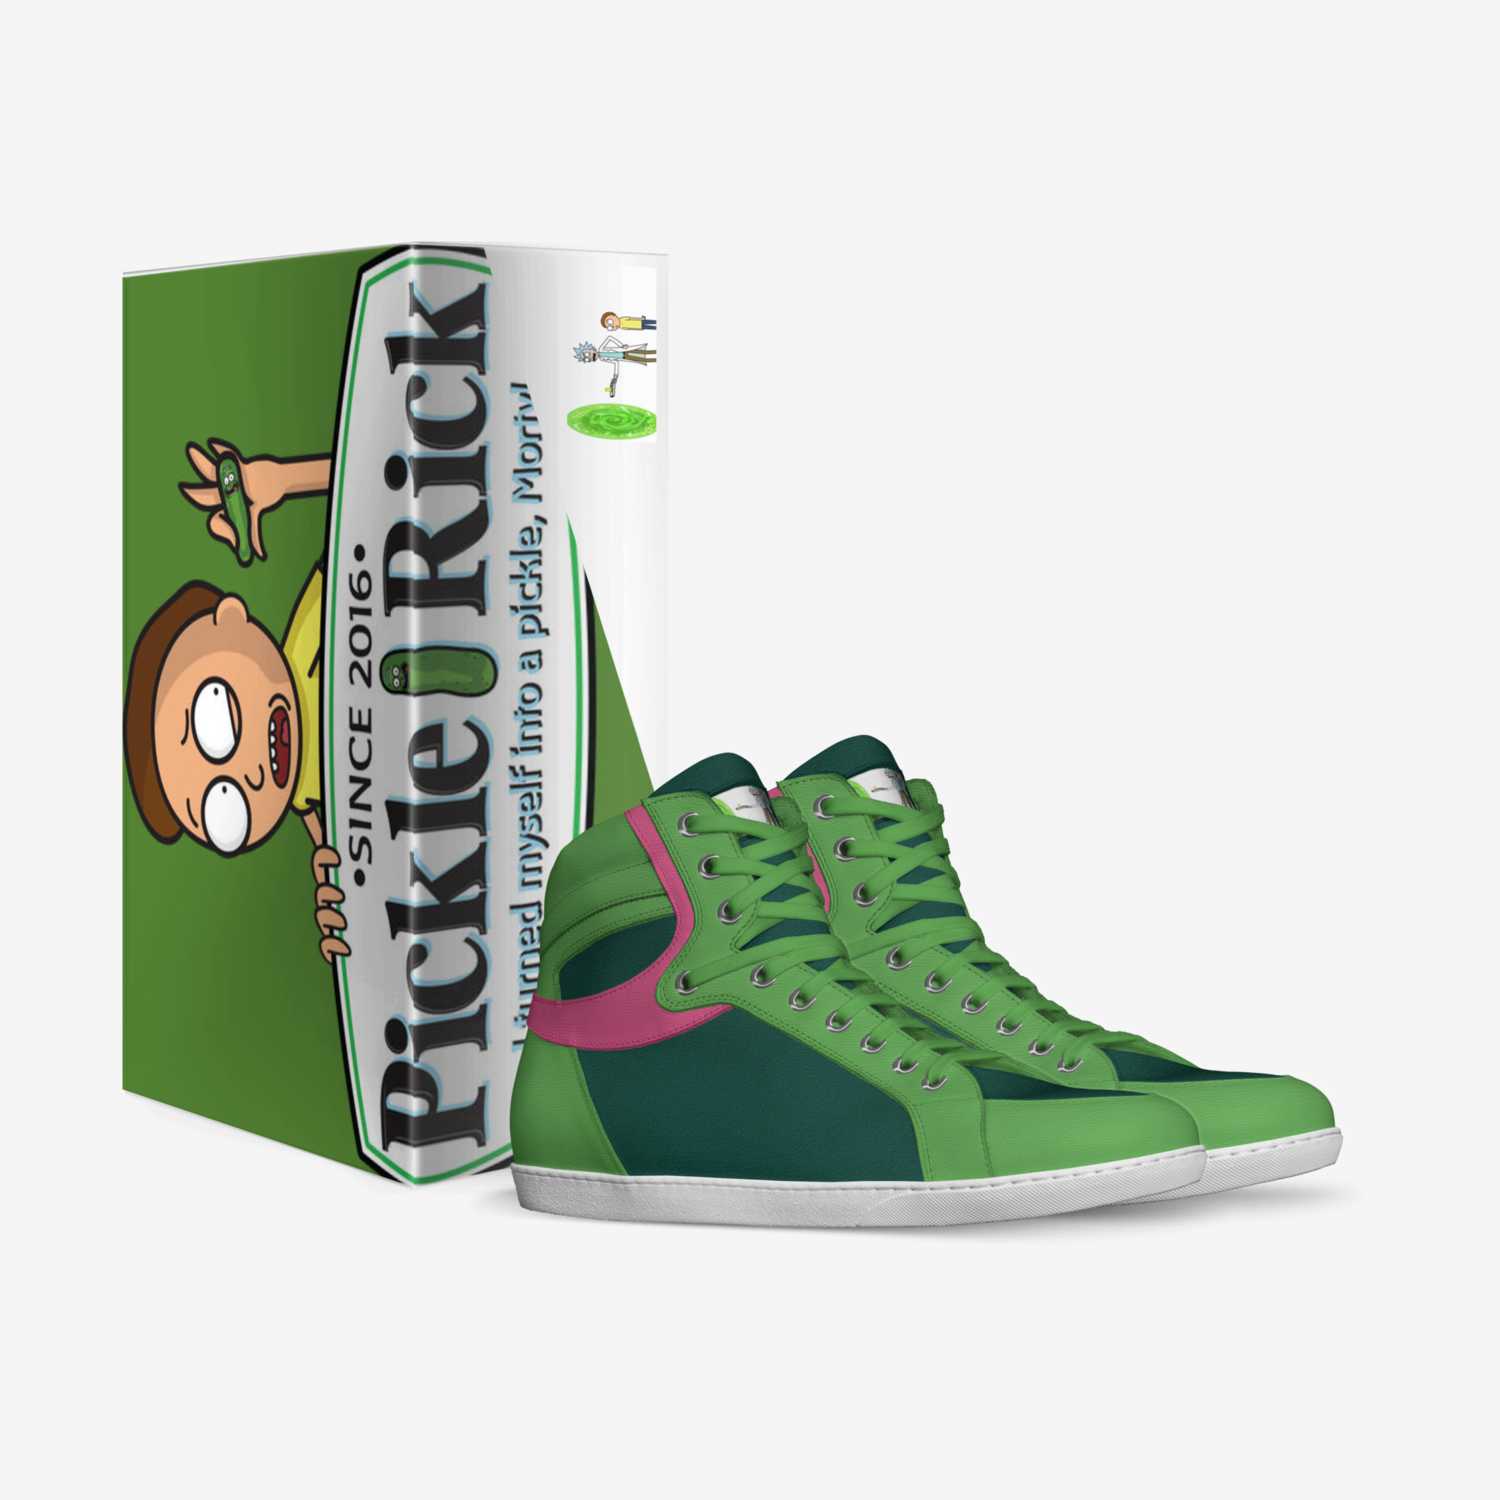 Pickle Rich custom made in Italy shoes by Richard Burgos | Box view